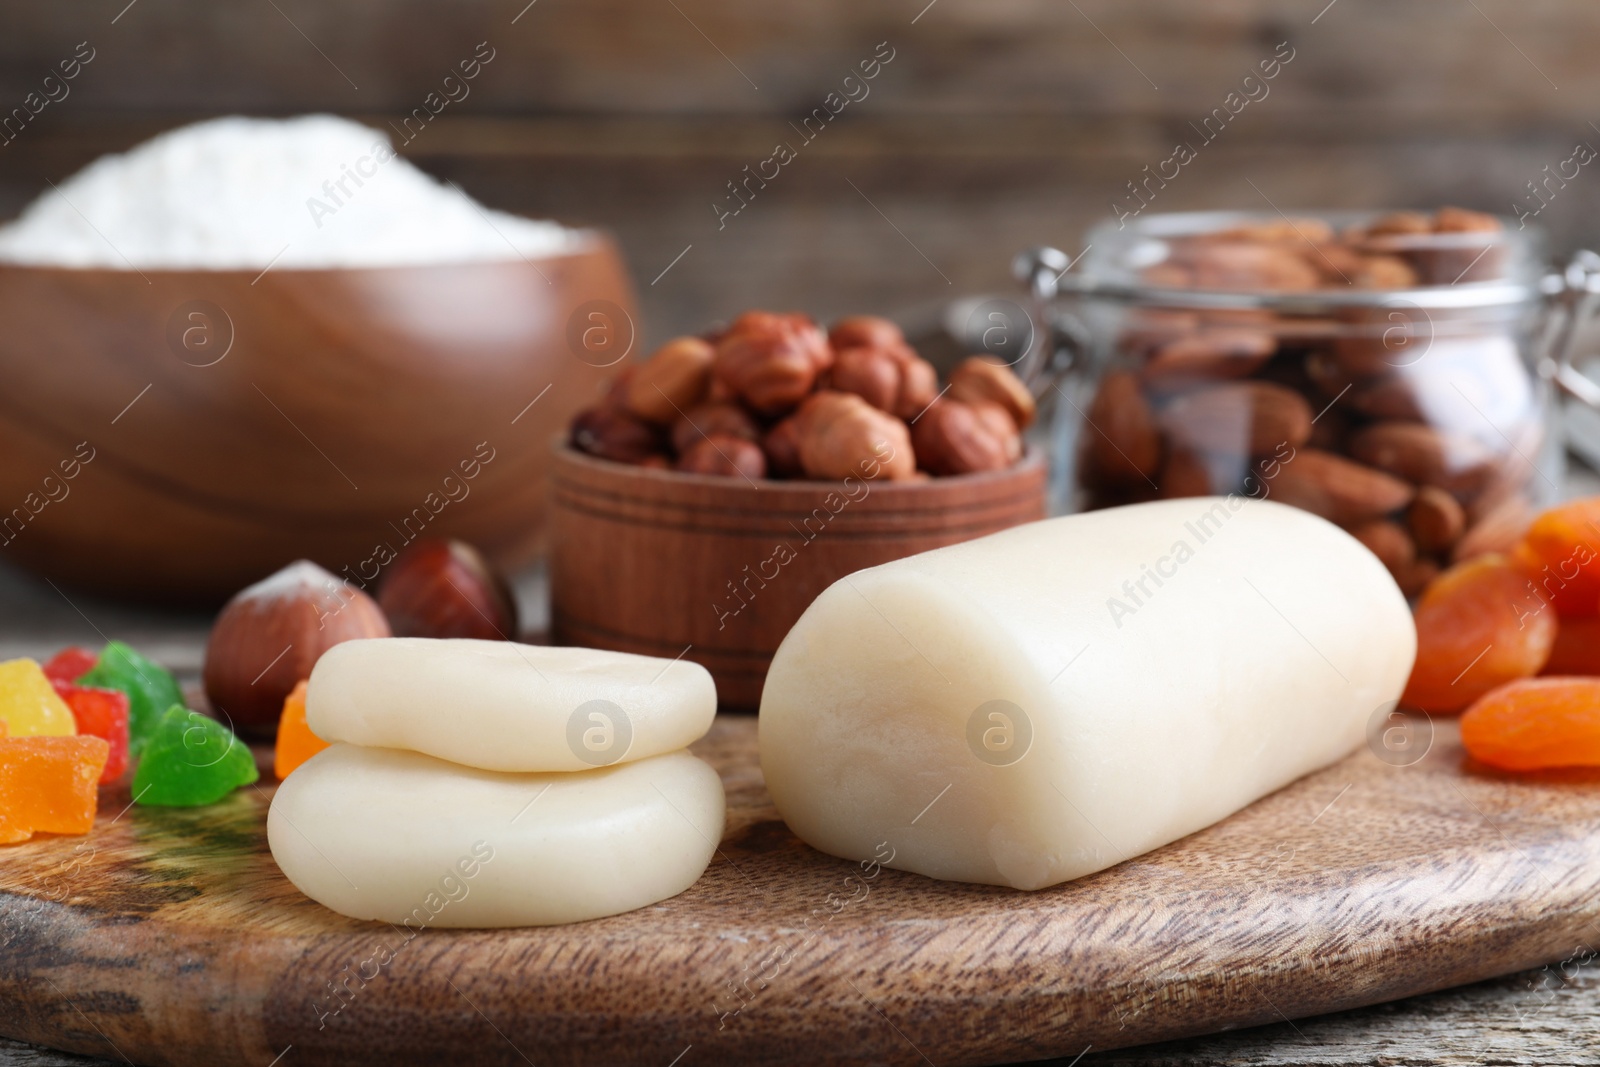 Photo of Marzipan and other ingredients for homemade Stollen on wooden table, closeup. Baking traditional German Christmas bread